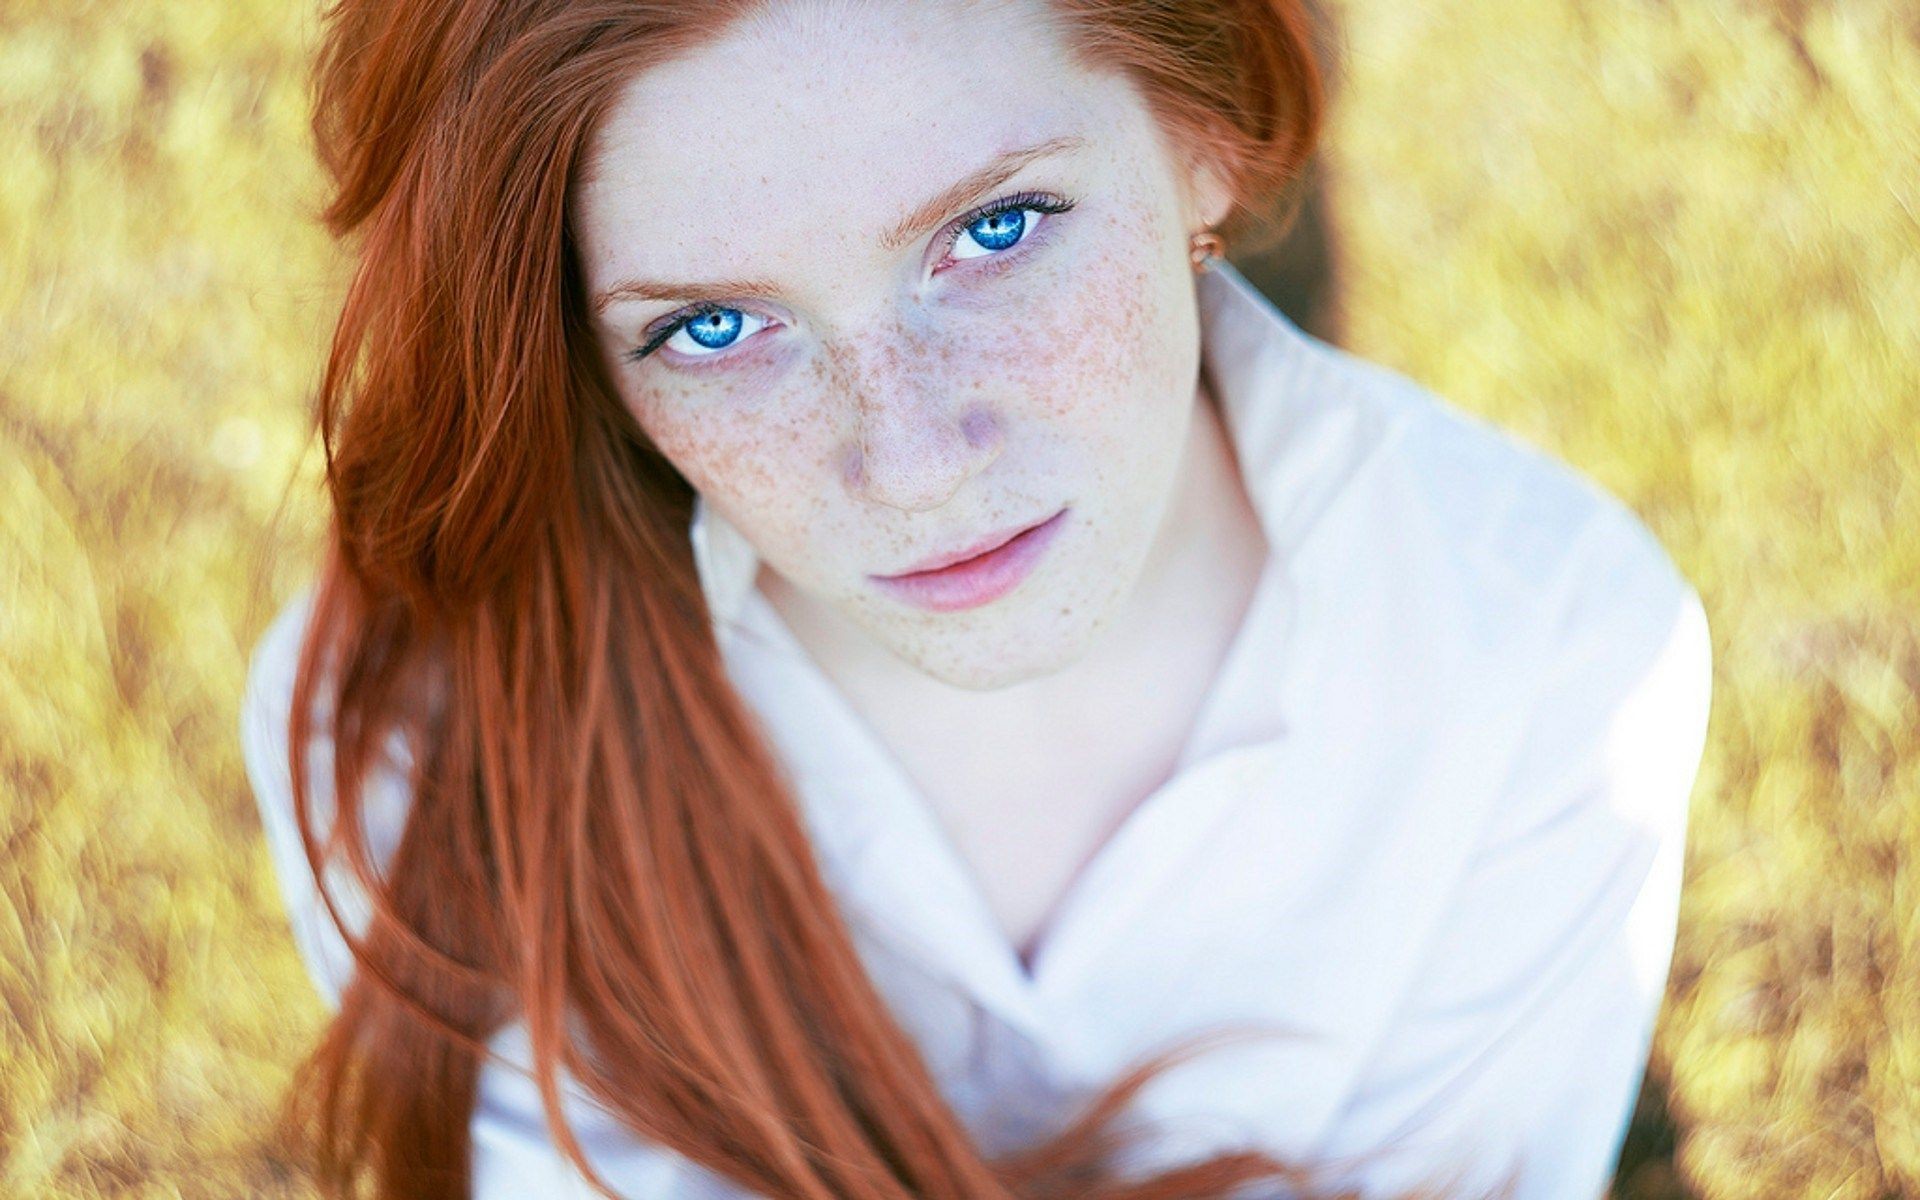 1920x1200 http://static.hdw.eweb4.com/media/wallpapers_/girls/1/4/redhead -with-freckles-girl-hd-wallpaper--37510.jpg | Photography |  Pinterest ...